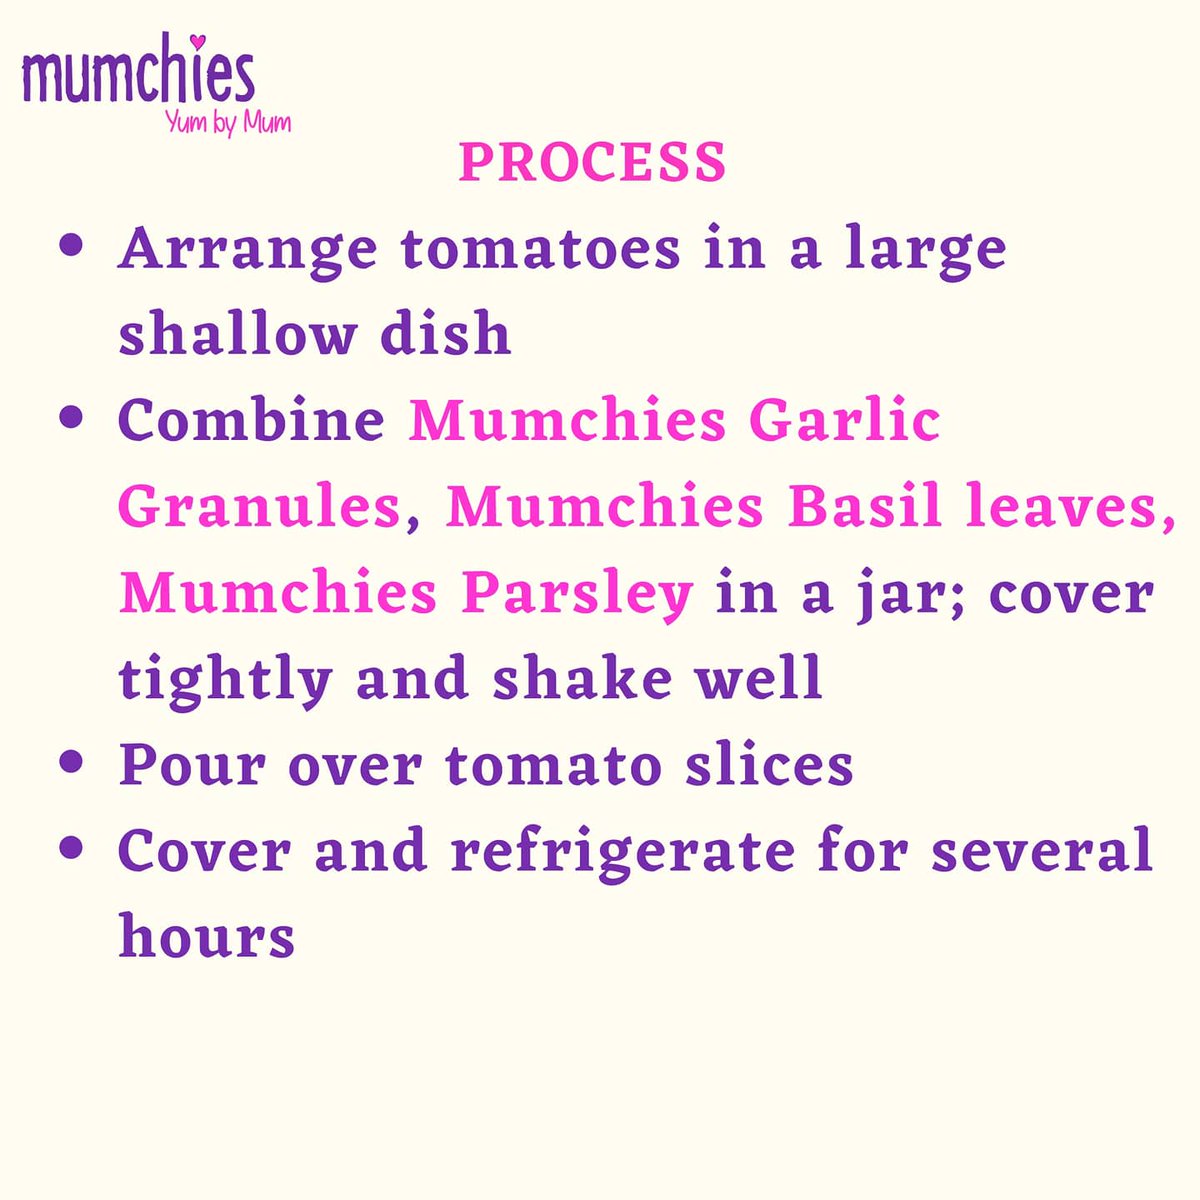 A versatile side dish prepared with herbs and seasonings from Mumchies... 

Order herbs on mumchies.com

𝓛𝓸𝓿𝓮 𝓲𝓷 𝓔𝓿𝓮𝓻𝔂 𝓑𝓲𝓽𝓮 💜

#lovemumchies #mumchies #mumchiesfoods #christmasgiftsideas  #workfromhomejobs #nighttime #tastyfoodrecipes #easyfoodrecipes